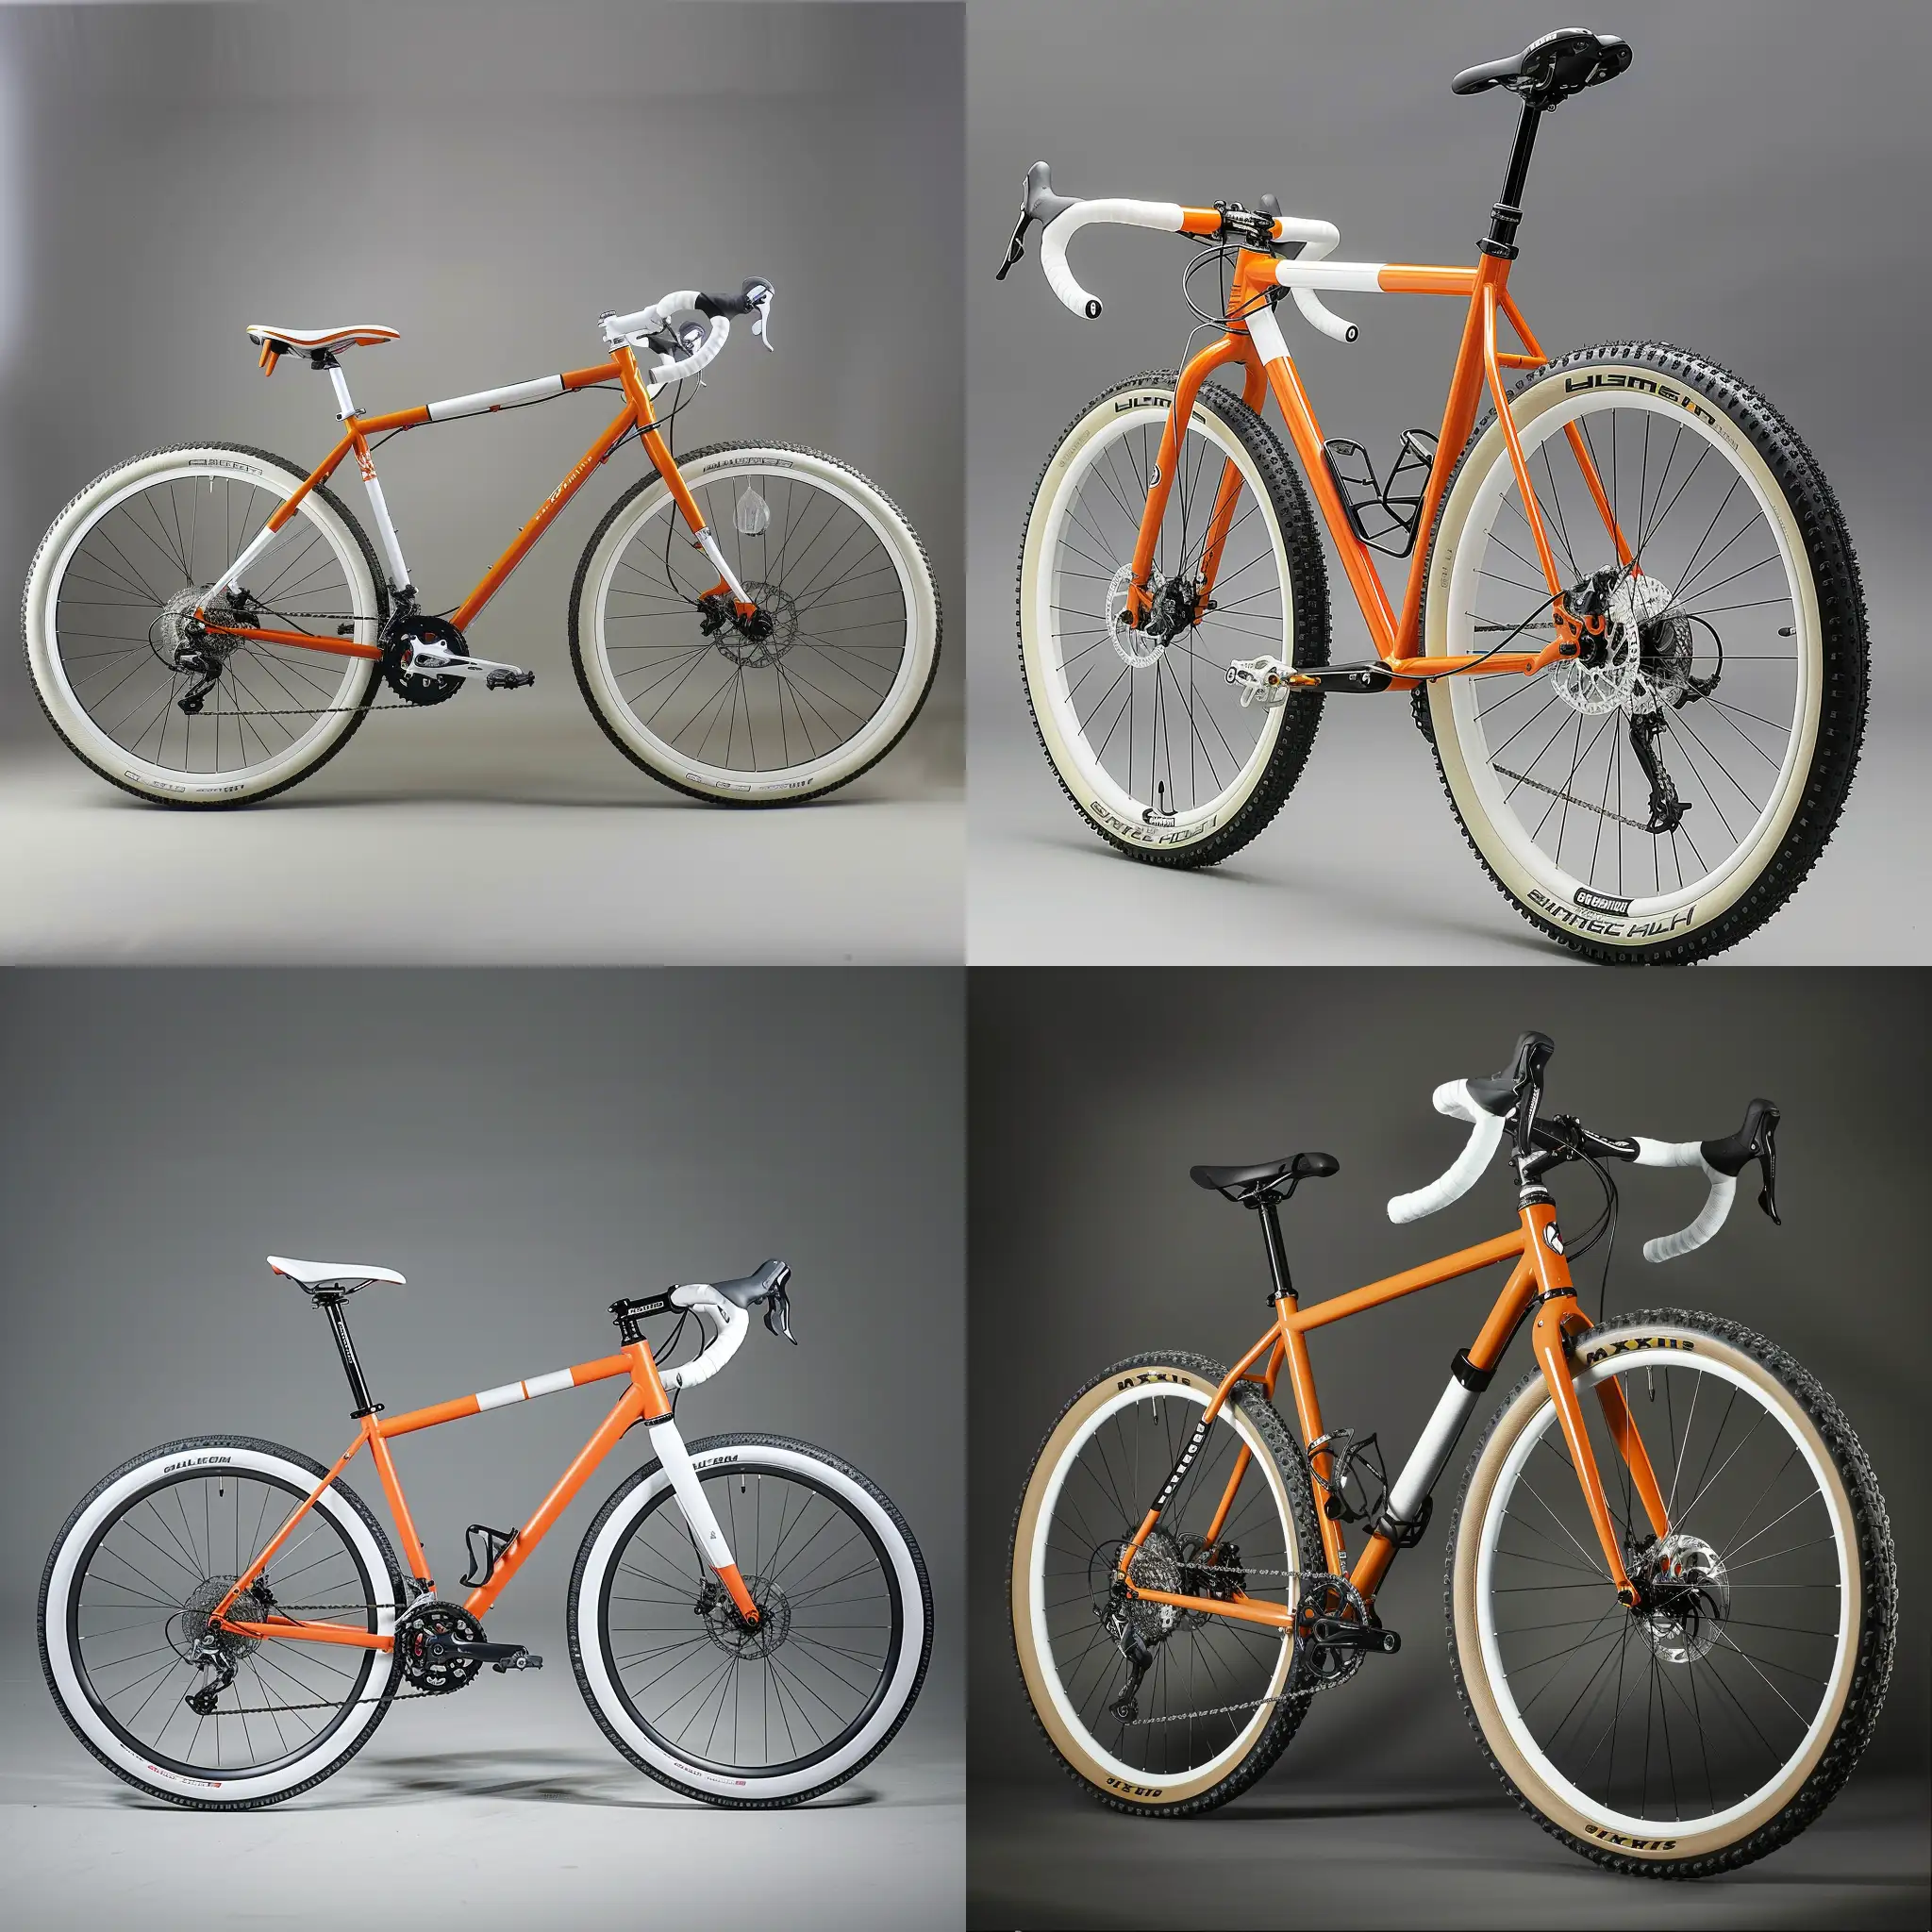 Adventure-Bicycle-Studio-Product-Photography-in-Vibrant-Orange-and-White